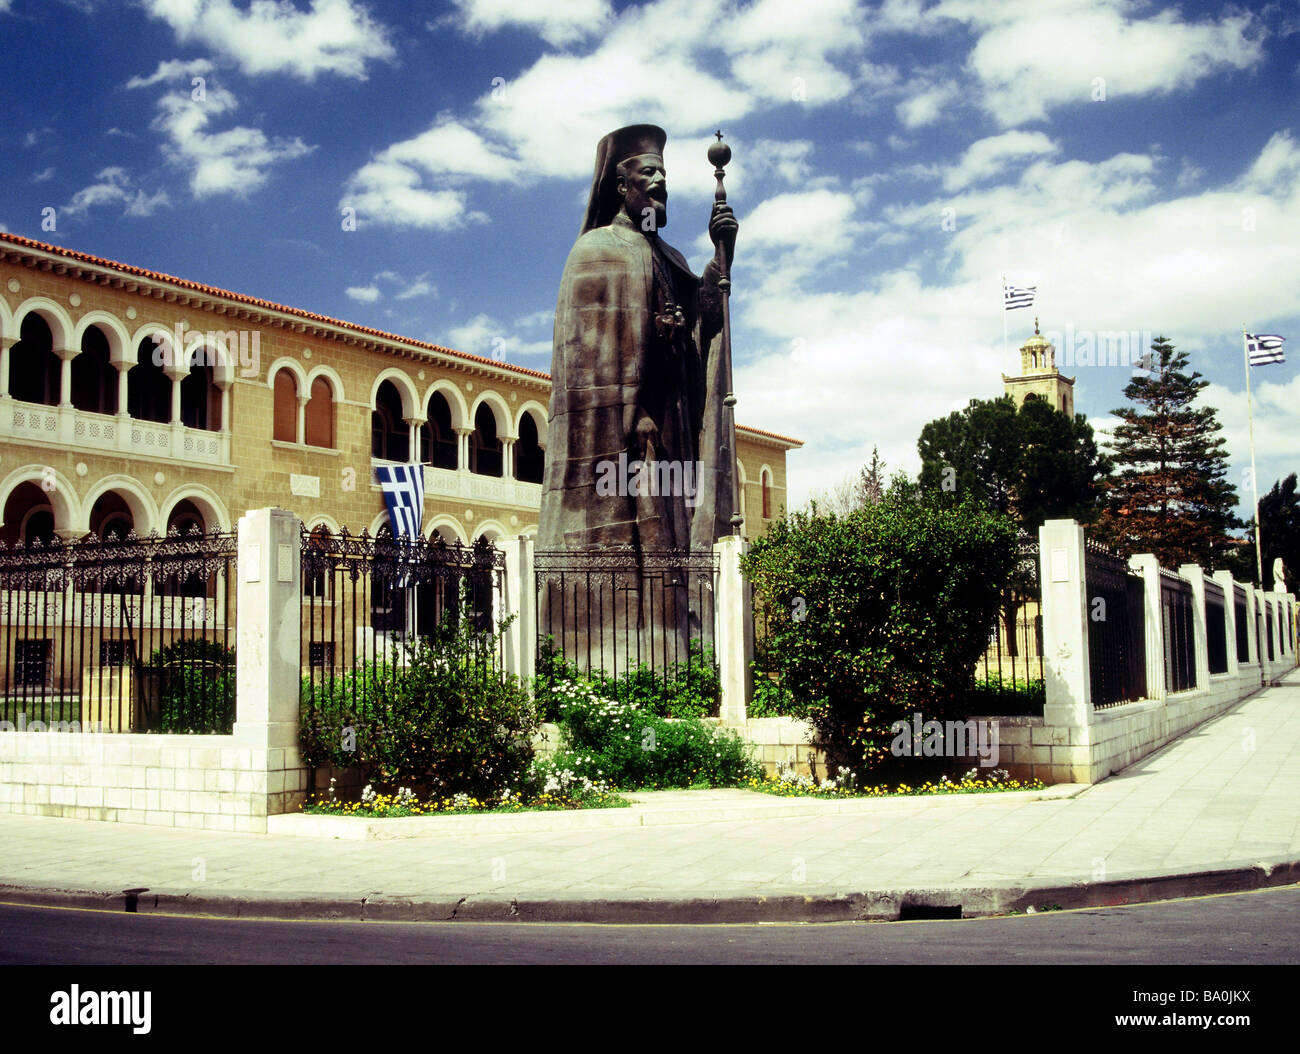 PRESIDENT MAKARIOS STATUE IN THE FRONT OF THE PRESIDENTIAL PALACE IN NICOSIA, CYPRUS Stock Photo